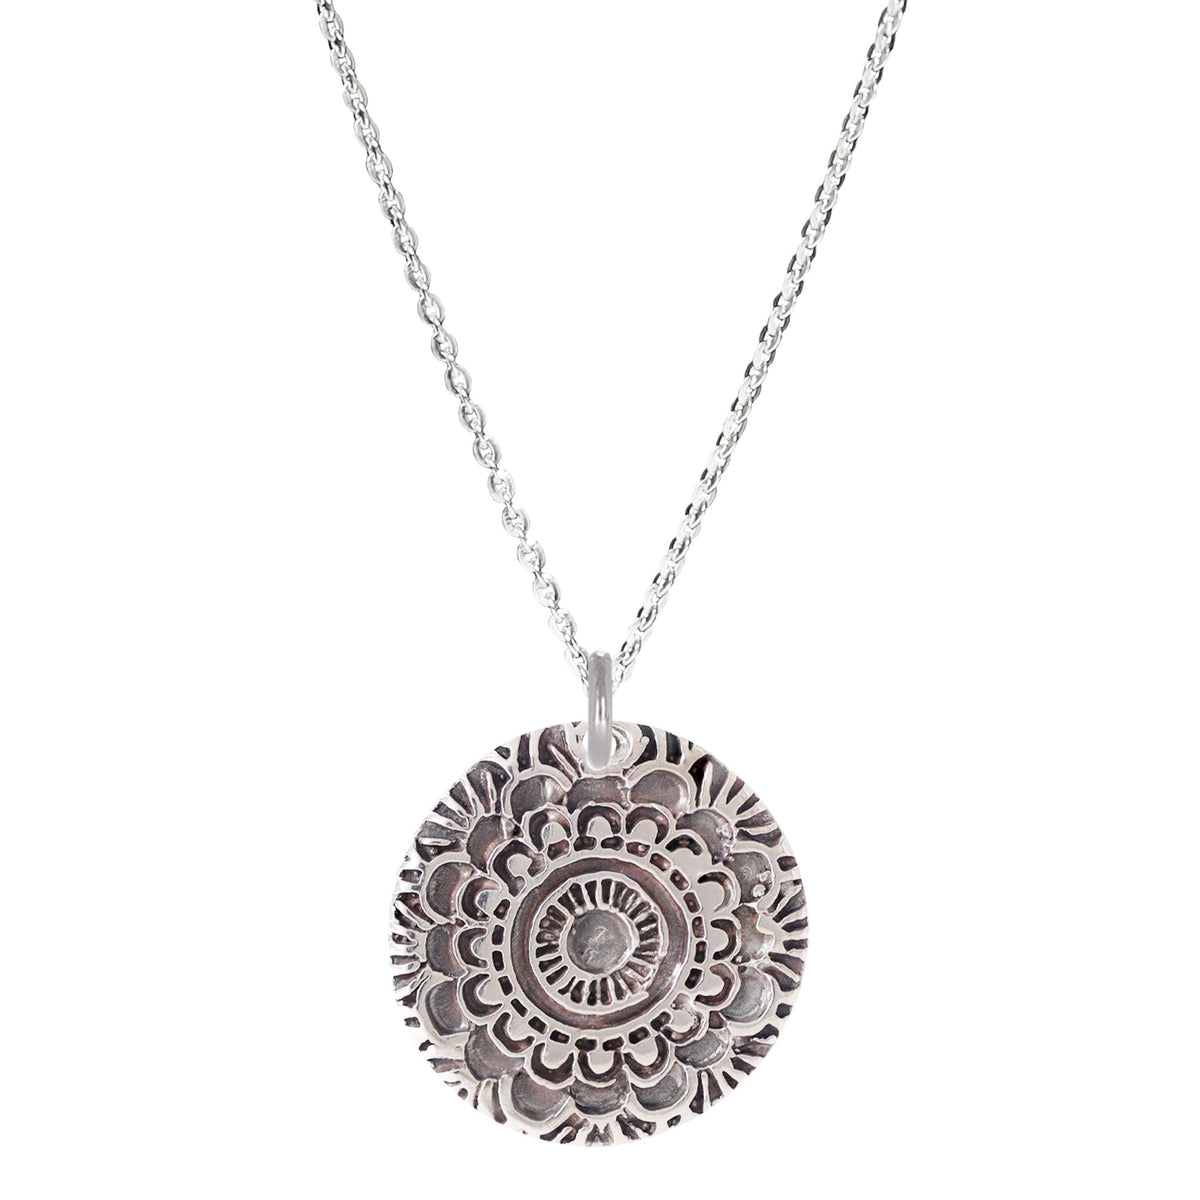 Mandala Textured Large Sterling Silver Necklace on a Sterling Silver Cable Chain